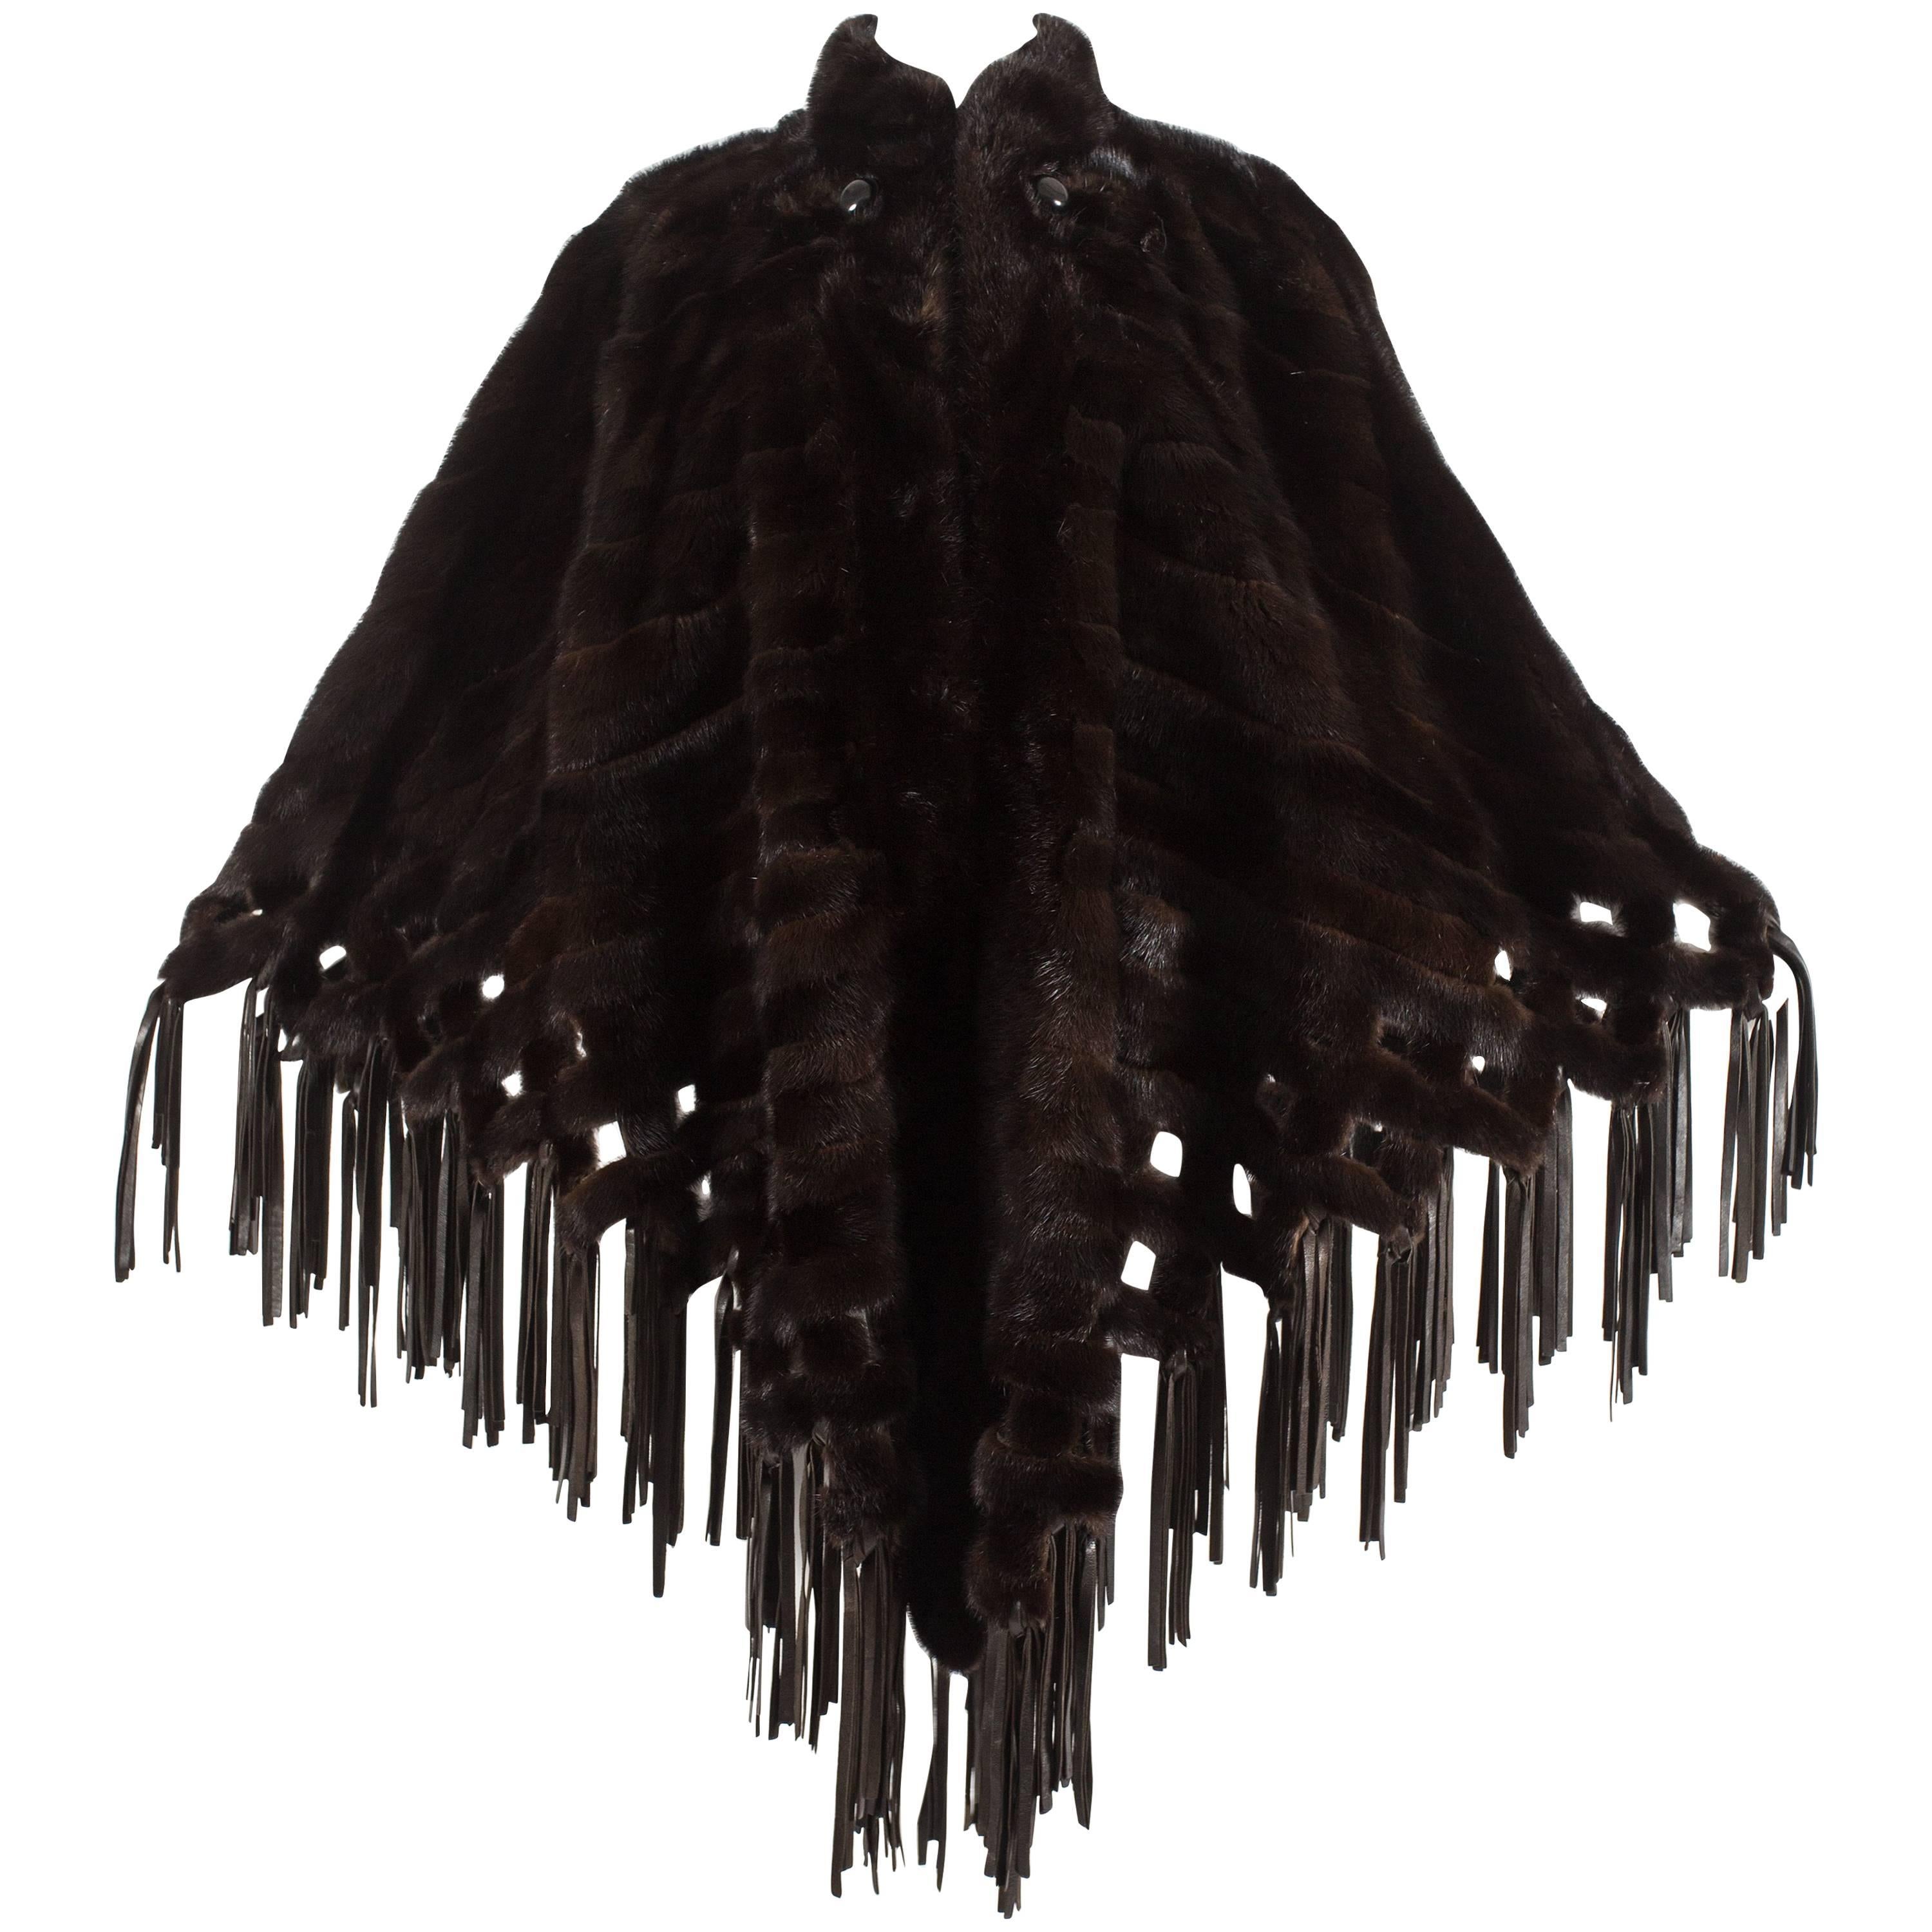 Christian Dior by Marc Bohan brown mink cape with leather tassels, c. 1970 For Sale